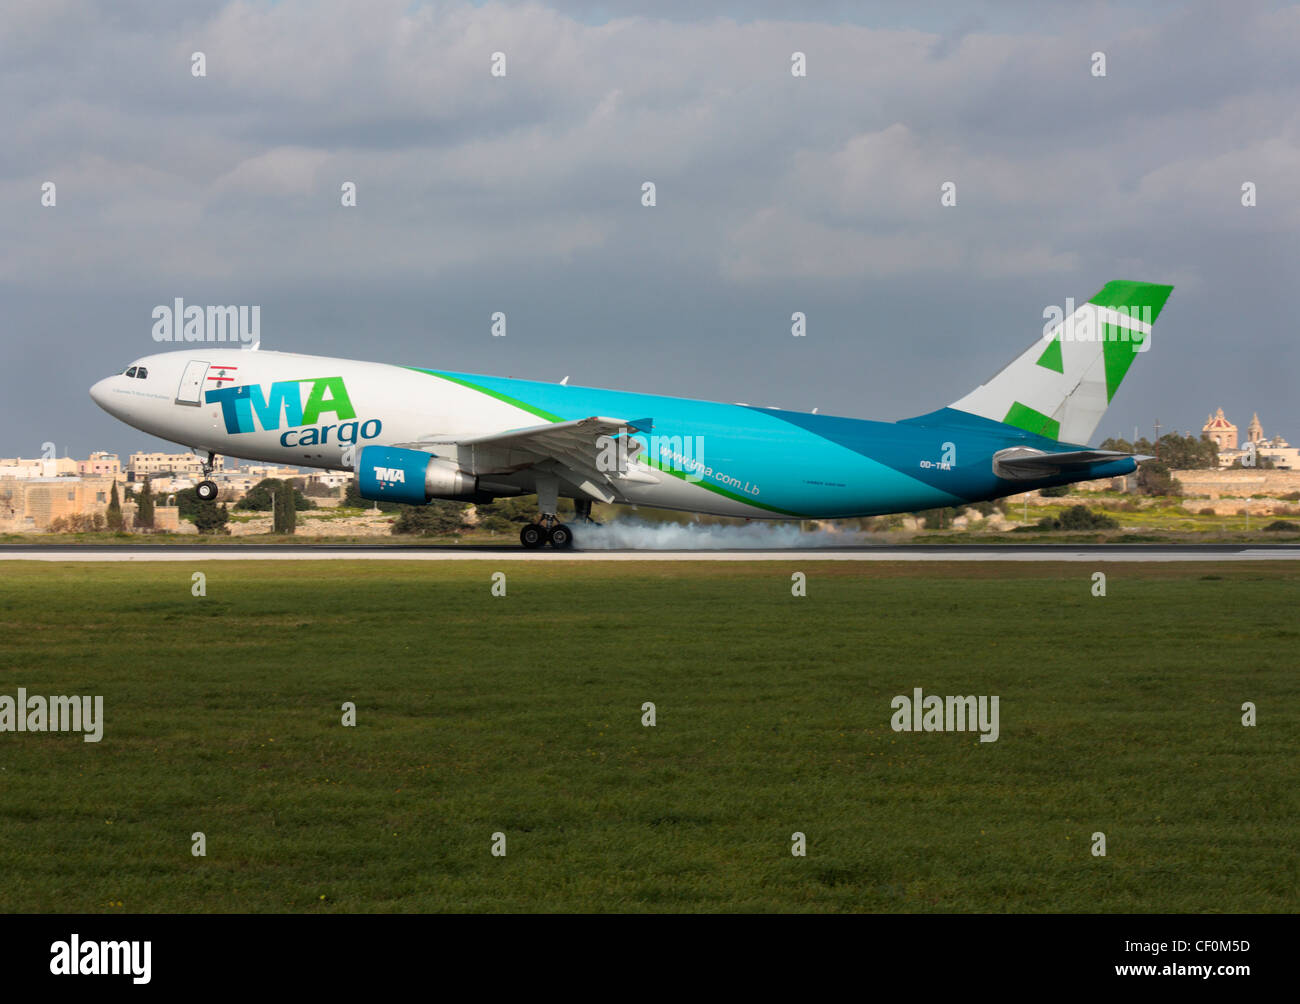 TMA Cargo Airbus A300-600F jet plane touching down on the runway and generating tyre smoke while landing at Malta Airport. Commercial air transport. Stock Photo